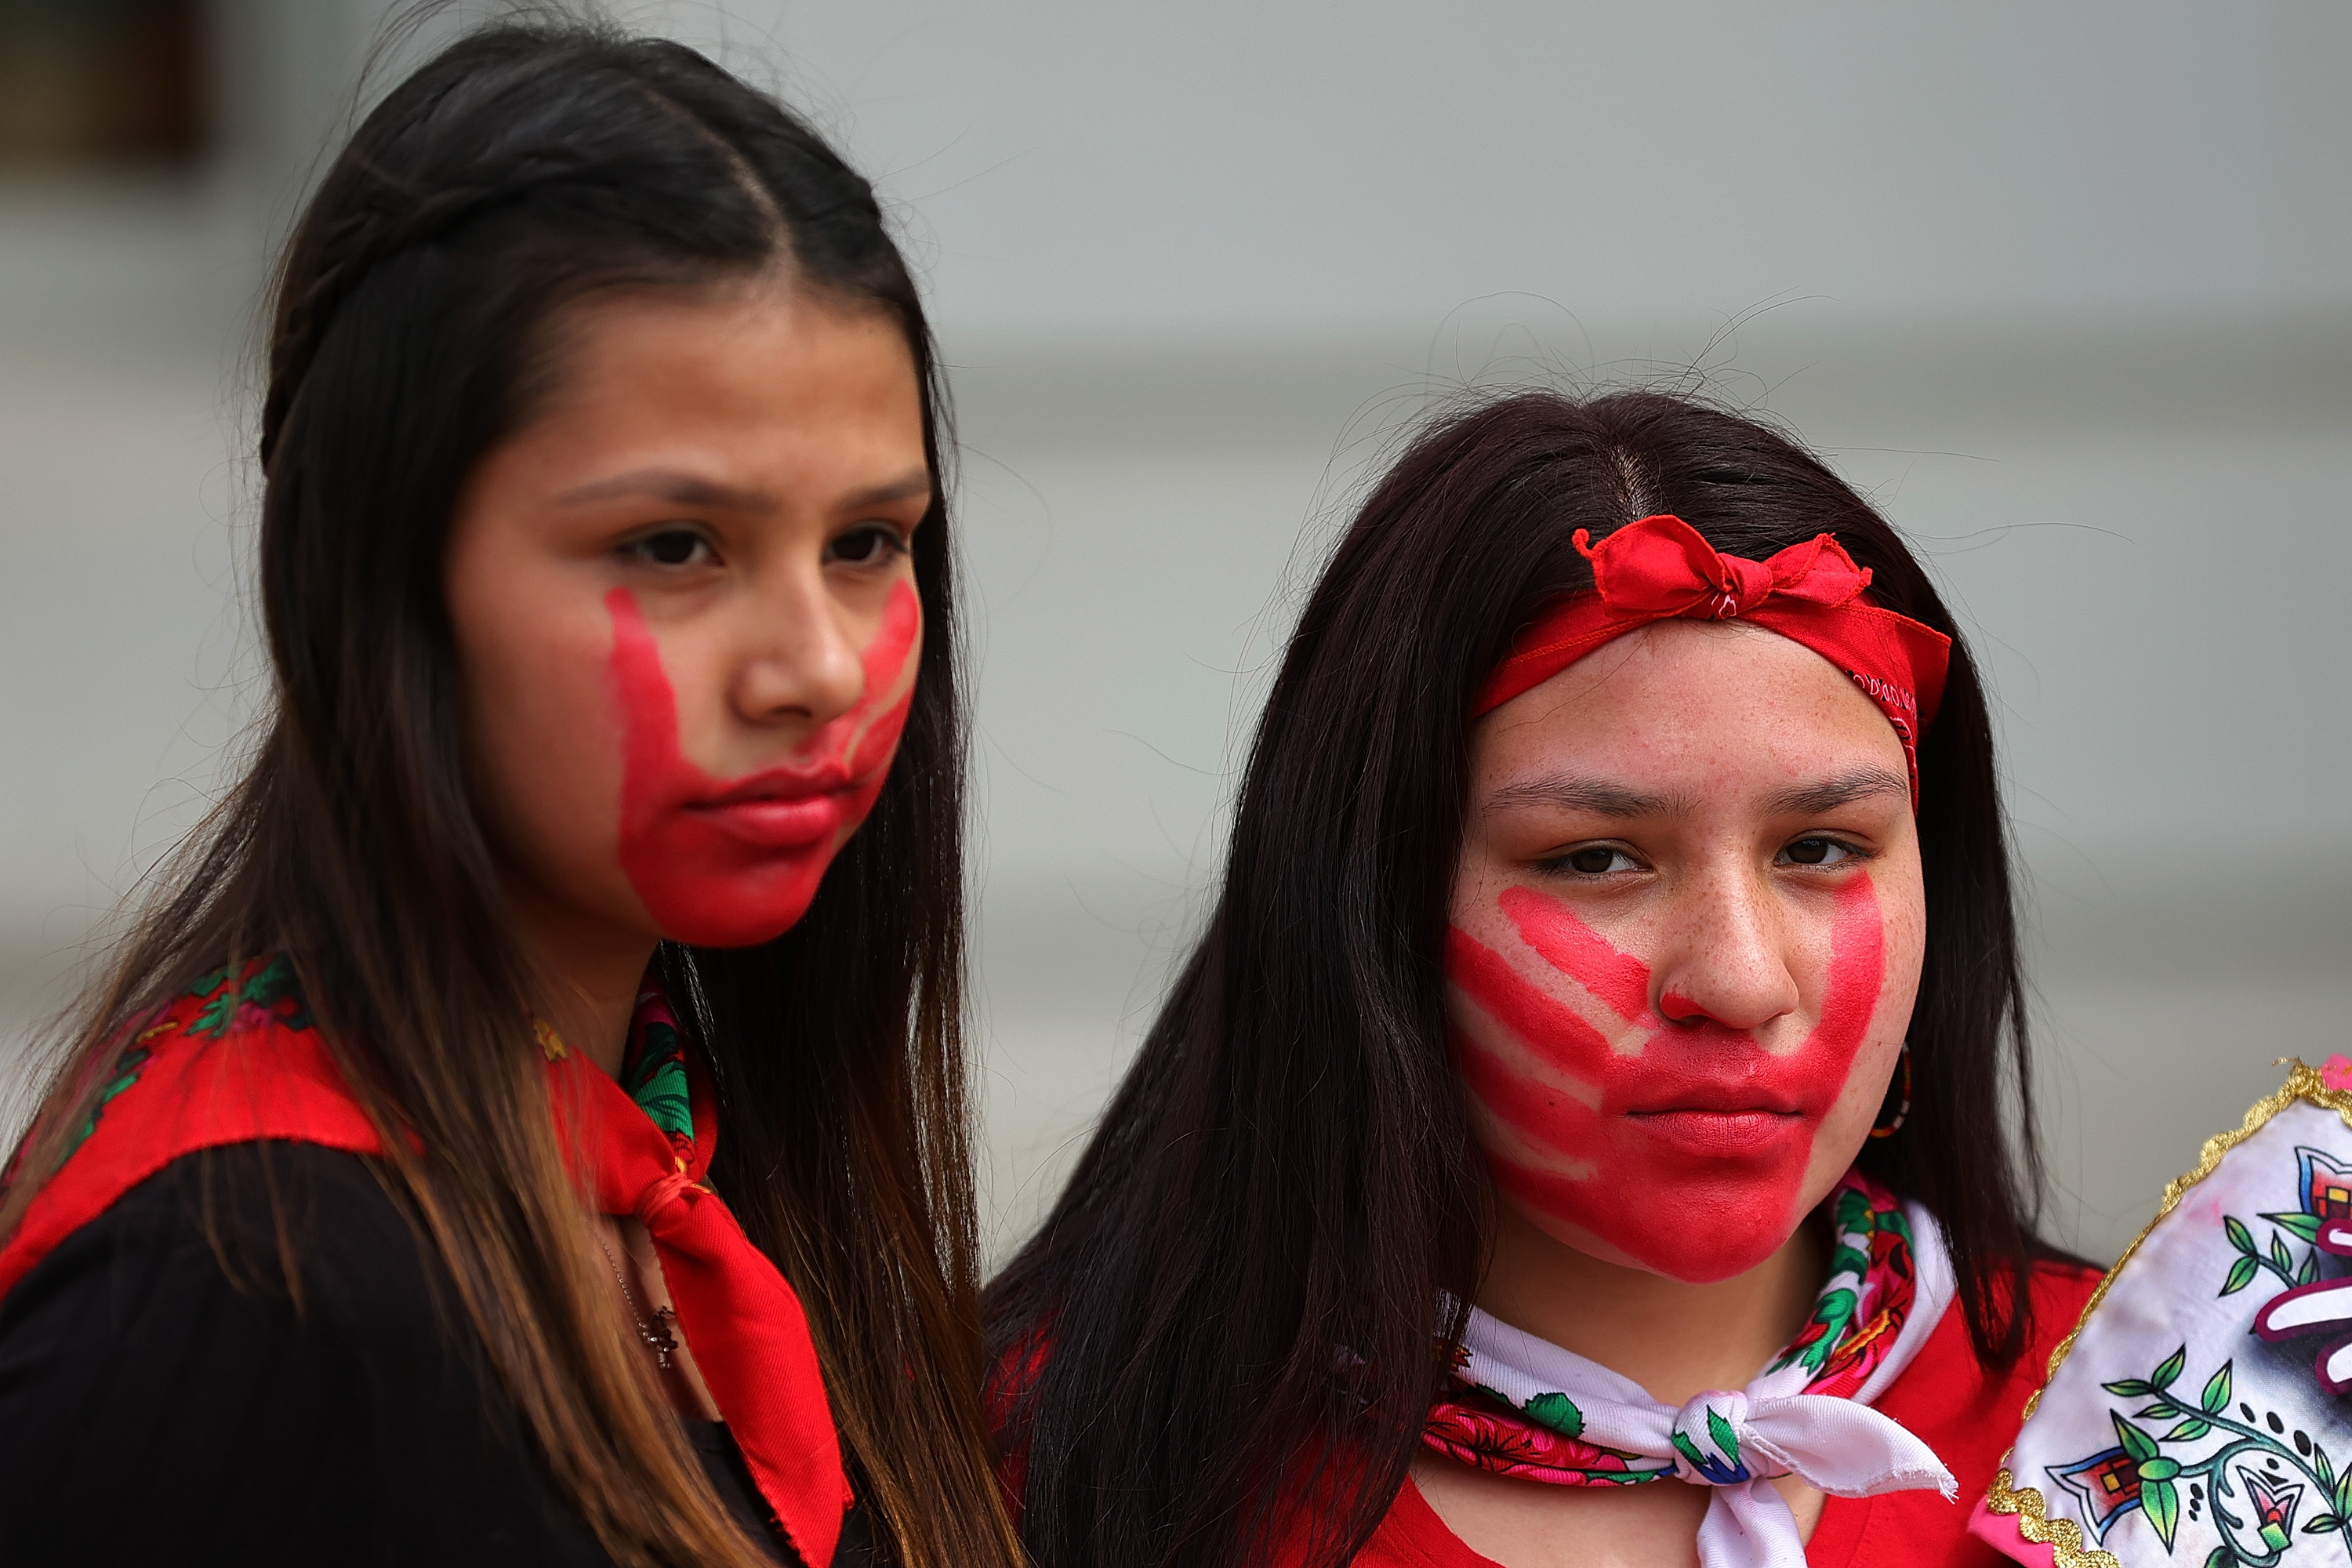 Watch 5 Girls on Why They're Proud to Be Native American